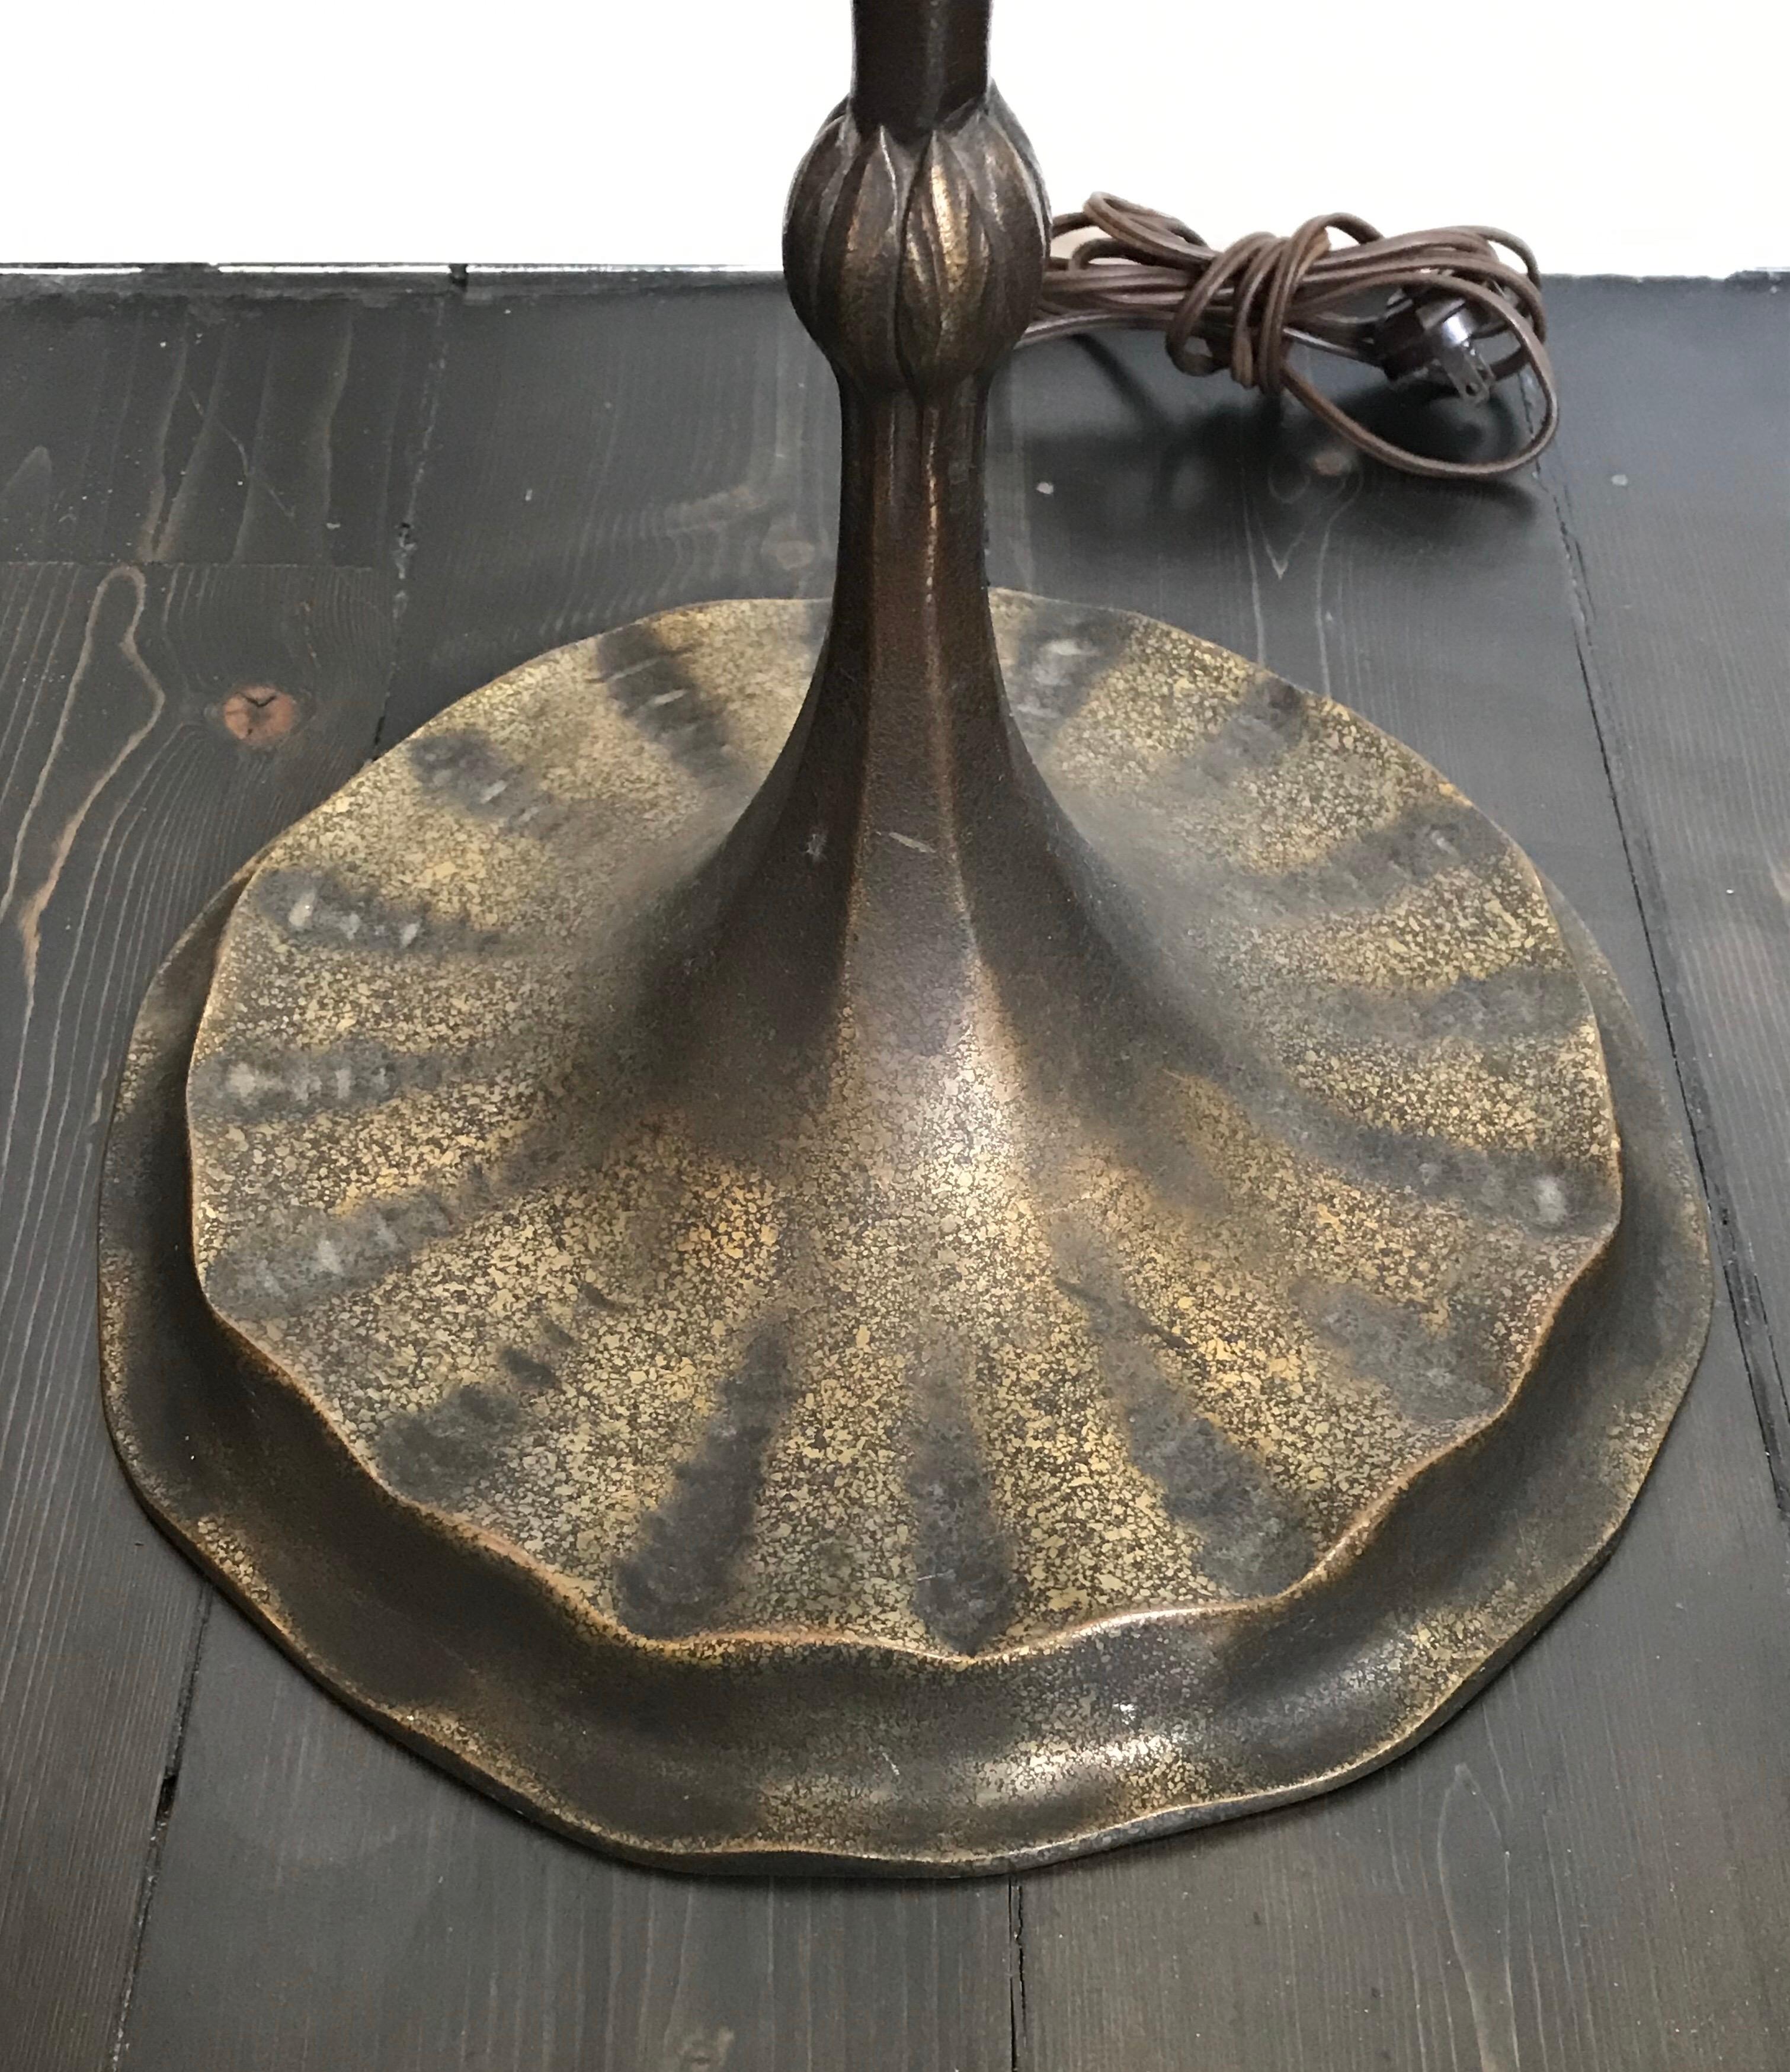 Beautiful Tiffany Studios Dora bronze floor lamp in the bud and stem pattern, mottled and gilt bronze. Art Nouveau, early 20th century. Stamped on underside Tiffany Studios New York Model 670A. Has outdated fatboy socket, old wiring and milk glass